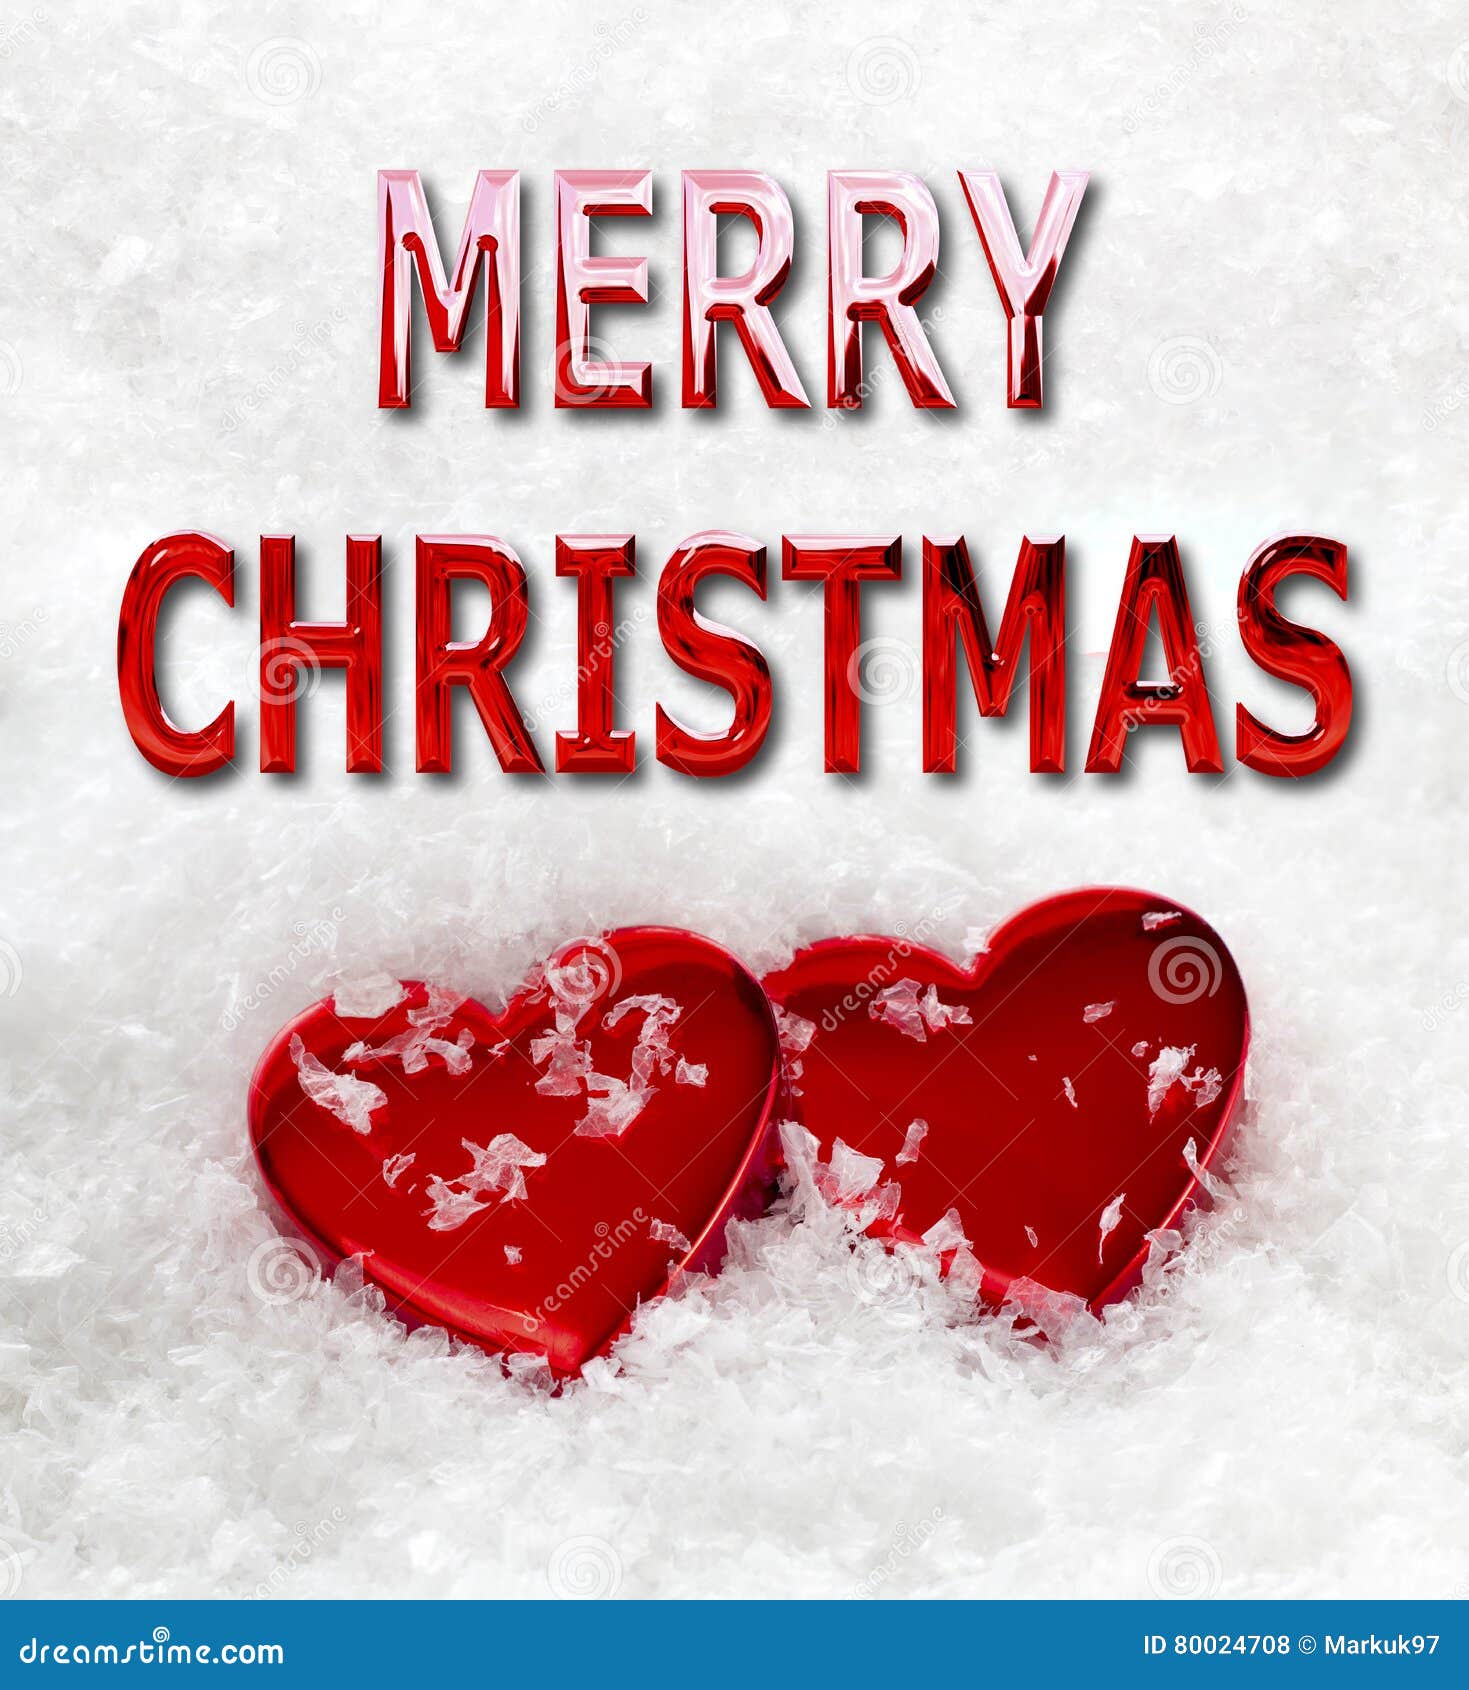 Merry Christmas Love Hearts in Snow Stock Photo - Image of words ...